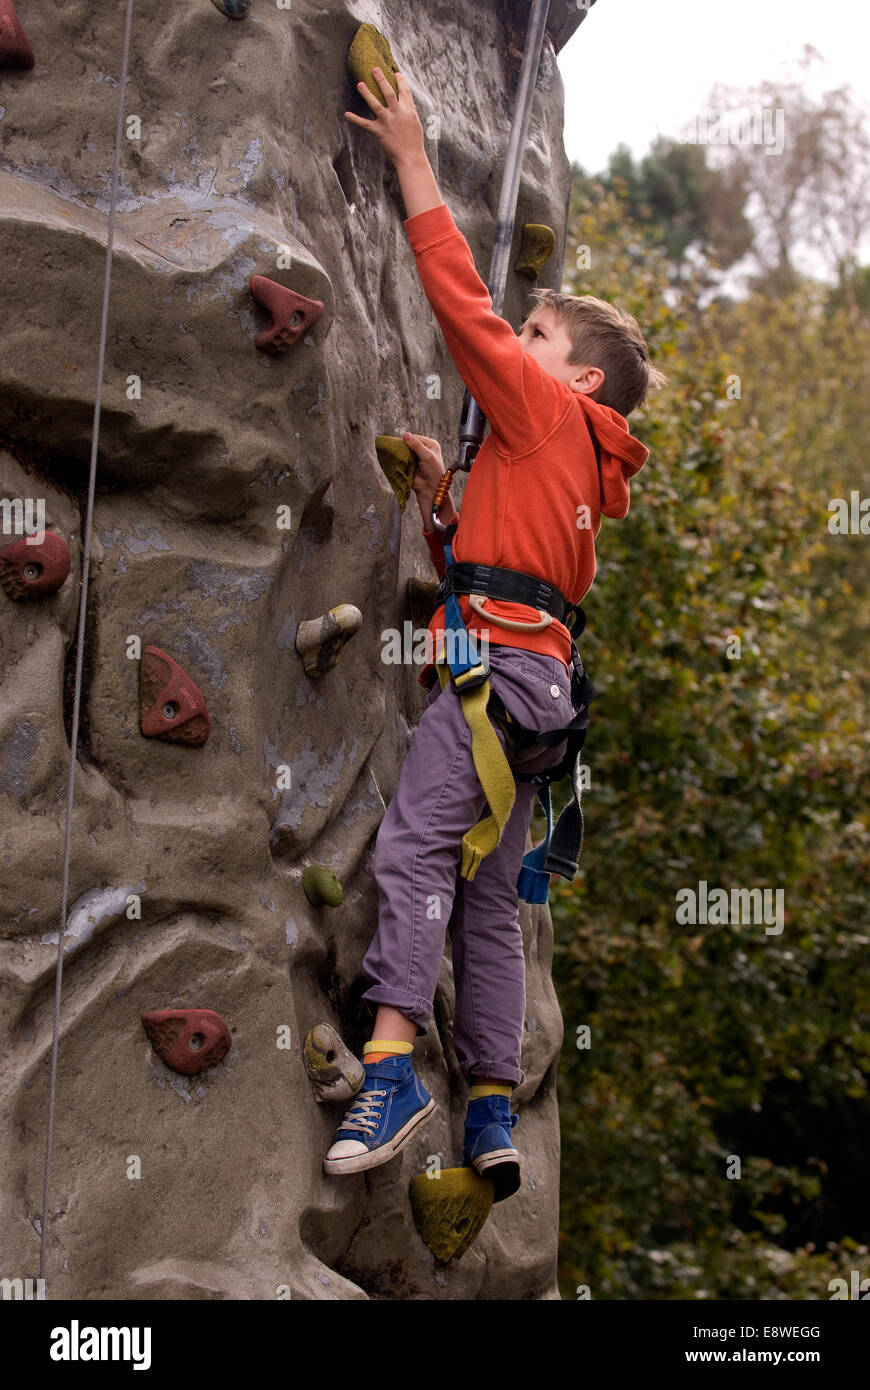 Young boy attempting the climbing wall at a farm open day, Blackmoor, Hampshire, UK. Stock Photo